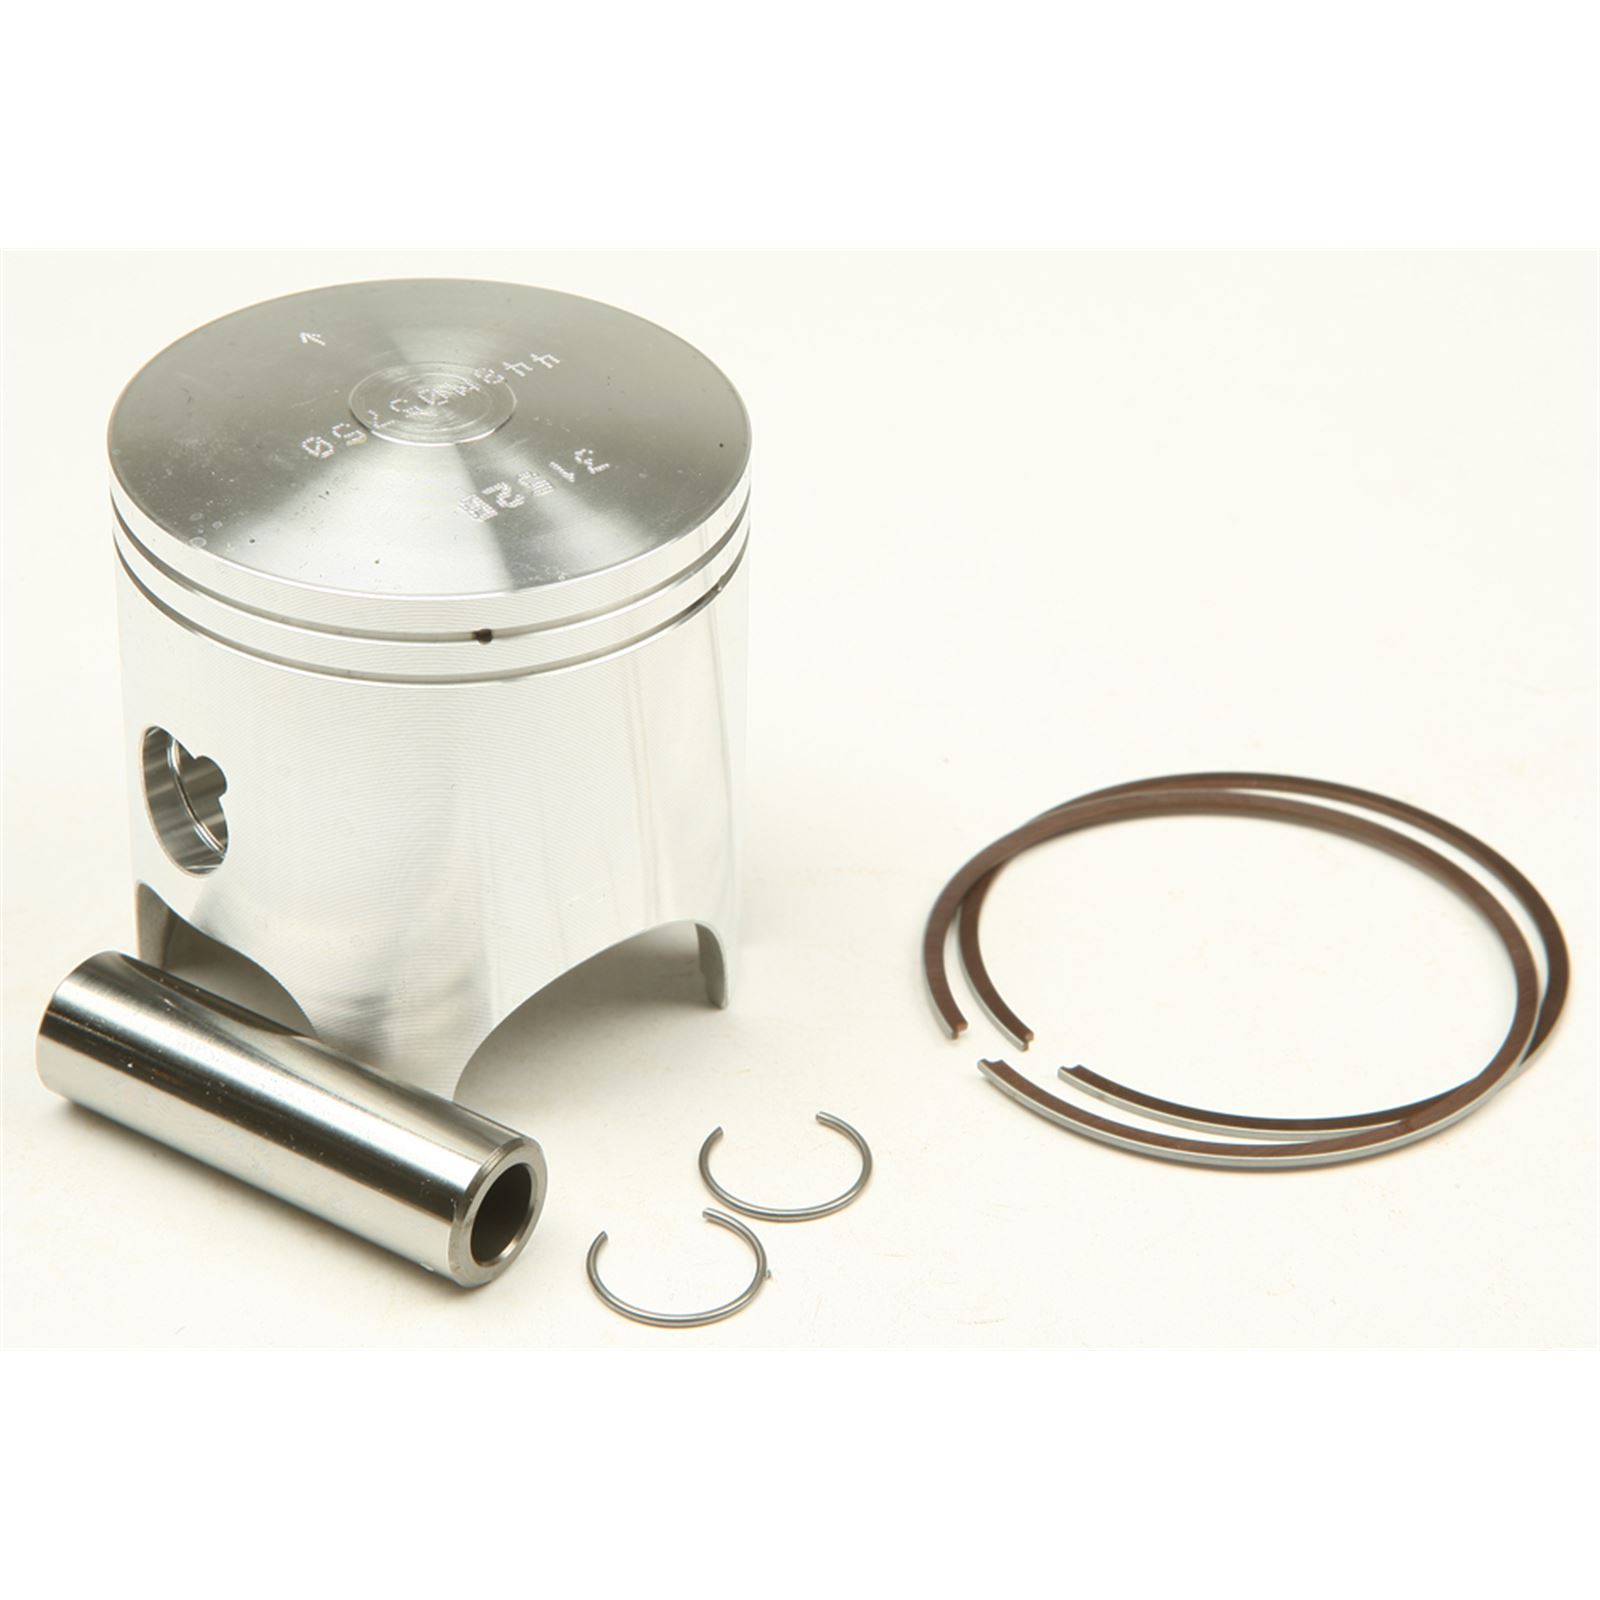 Wiseco Piston Motorcycle, ATV UTV  Powersports Parts The Best  Powersports, Motorcycle, ATV  Snow Gear, Accessories and More